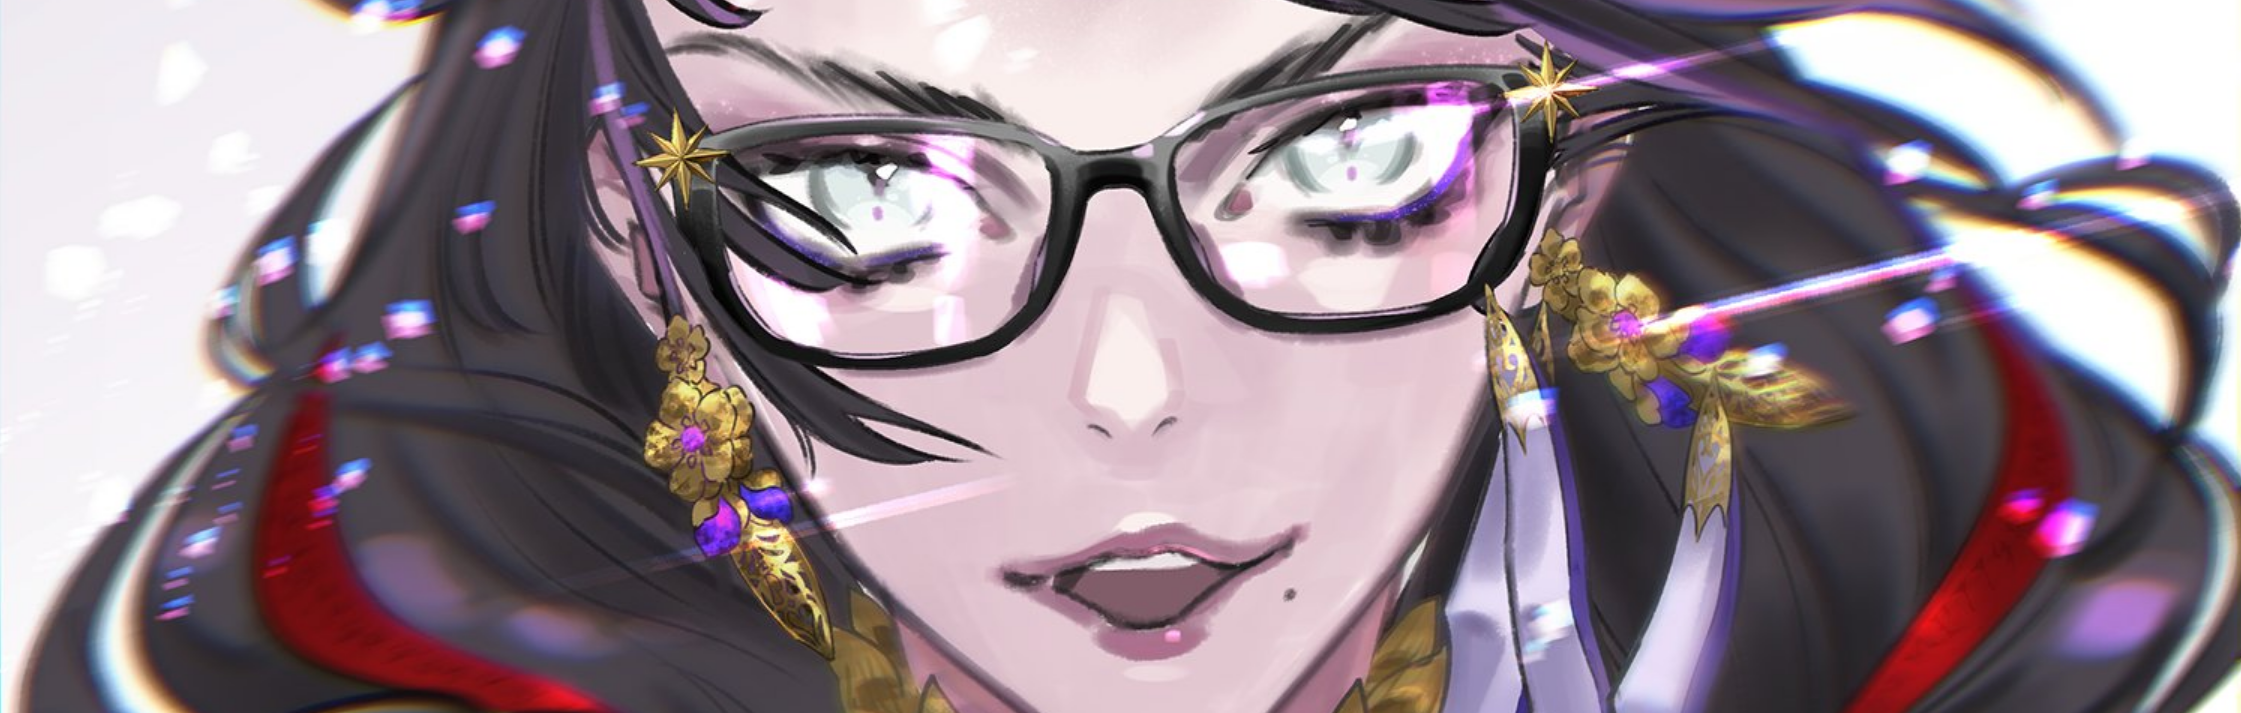 Bayonetta 3 plot twist has fans crying about character assassination